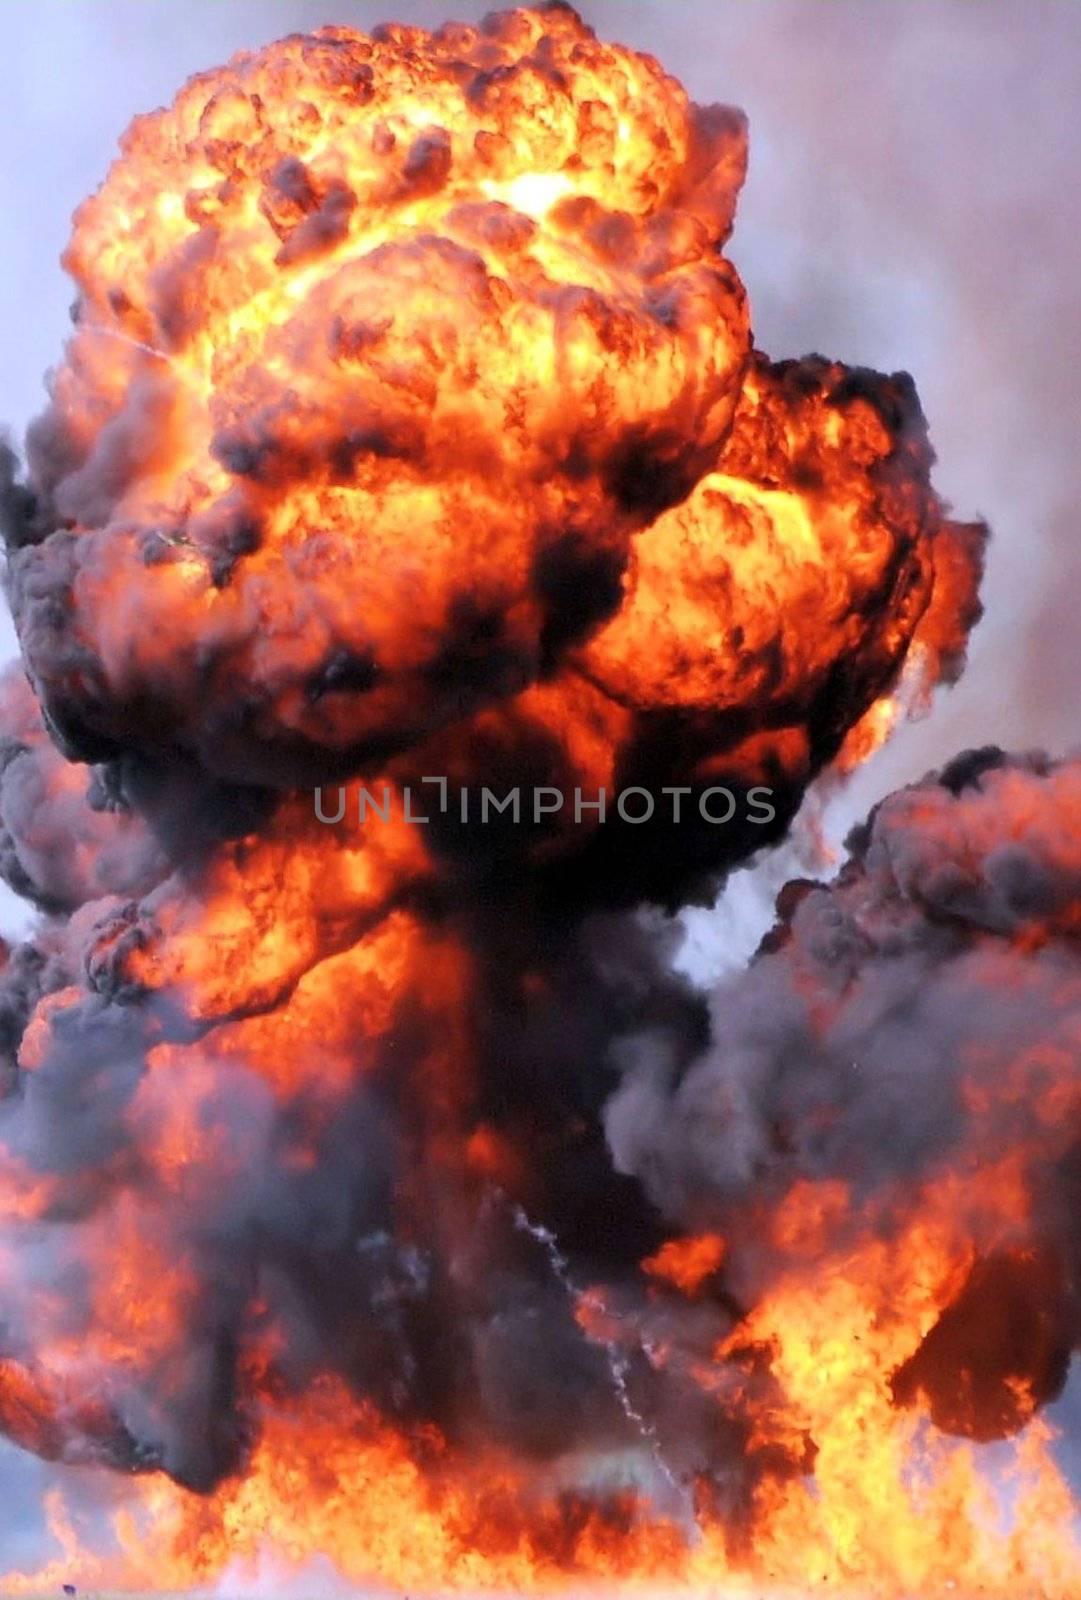 Ball of exploding fire and smoke